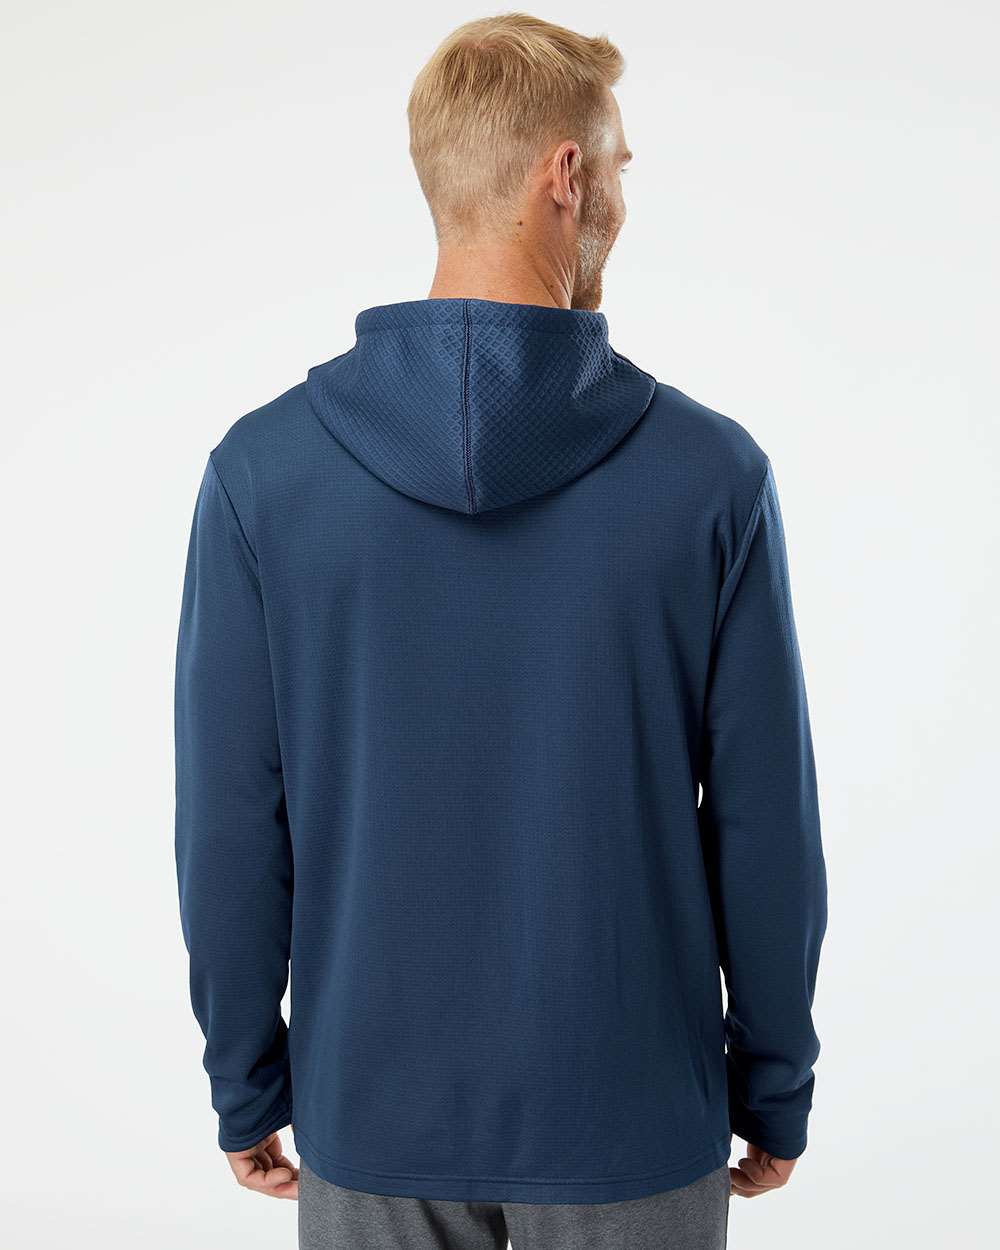 Adidas A530 Textured Mixed Media Hooded Sweatshirt #colormdl_Collegiate Navy